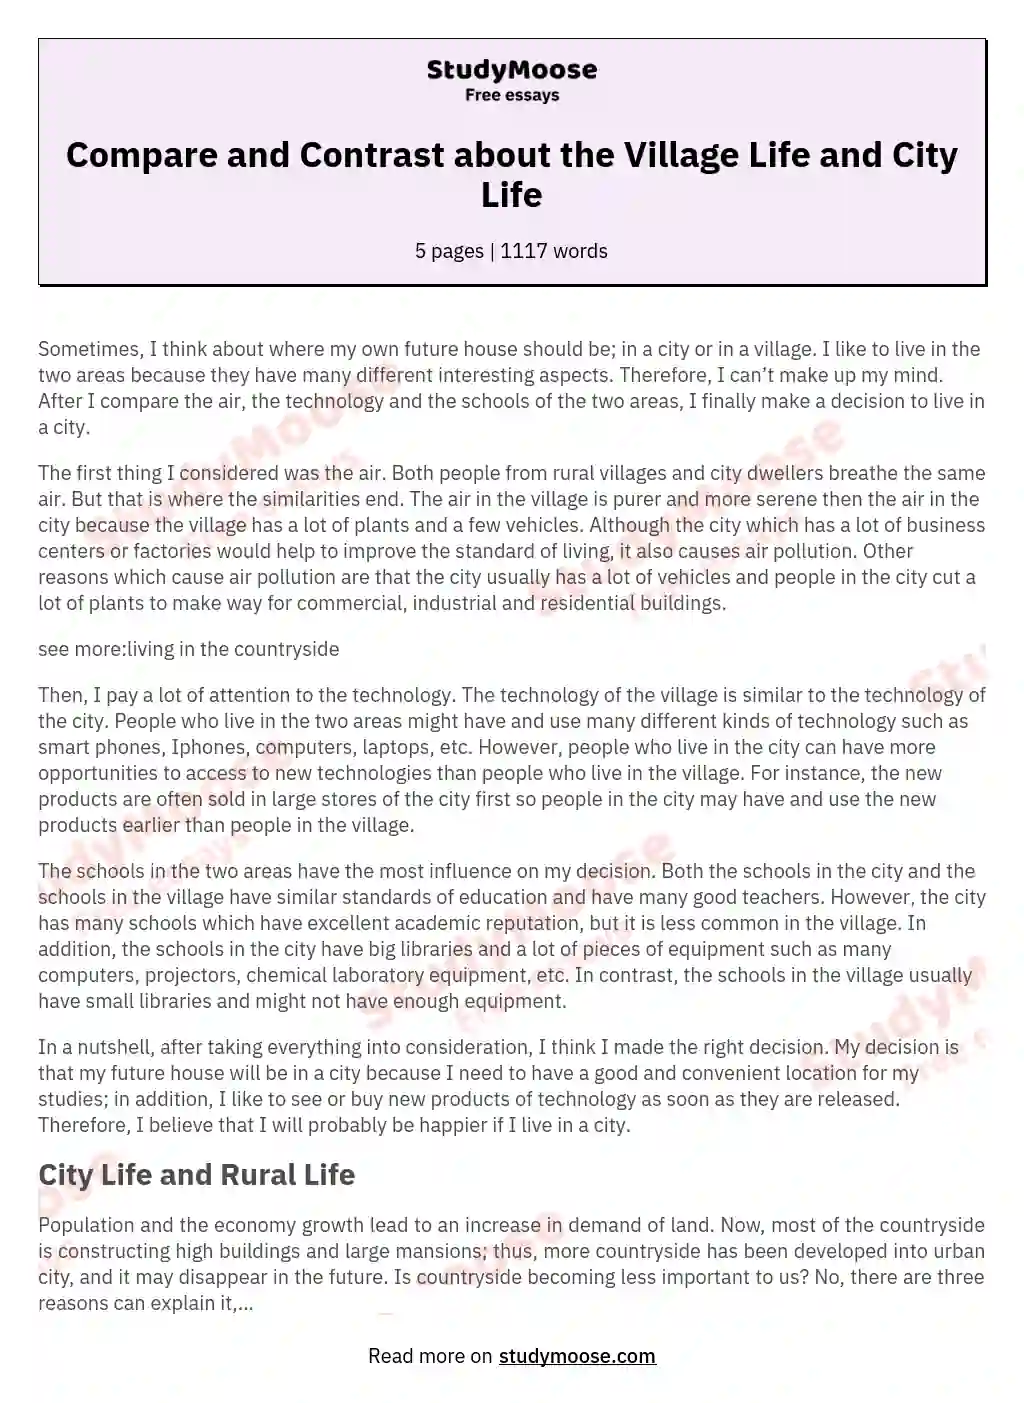 Compare and Contrast about the Village Life and City Life essay